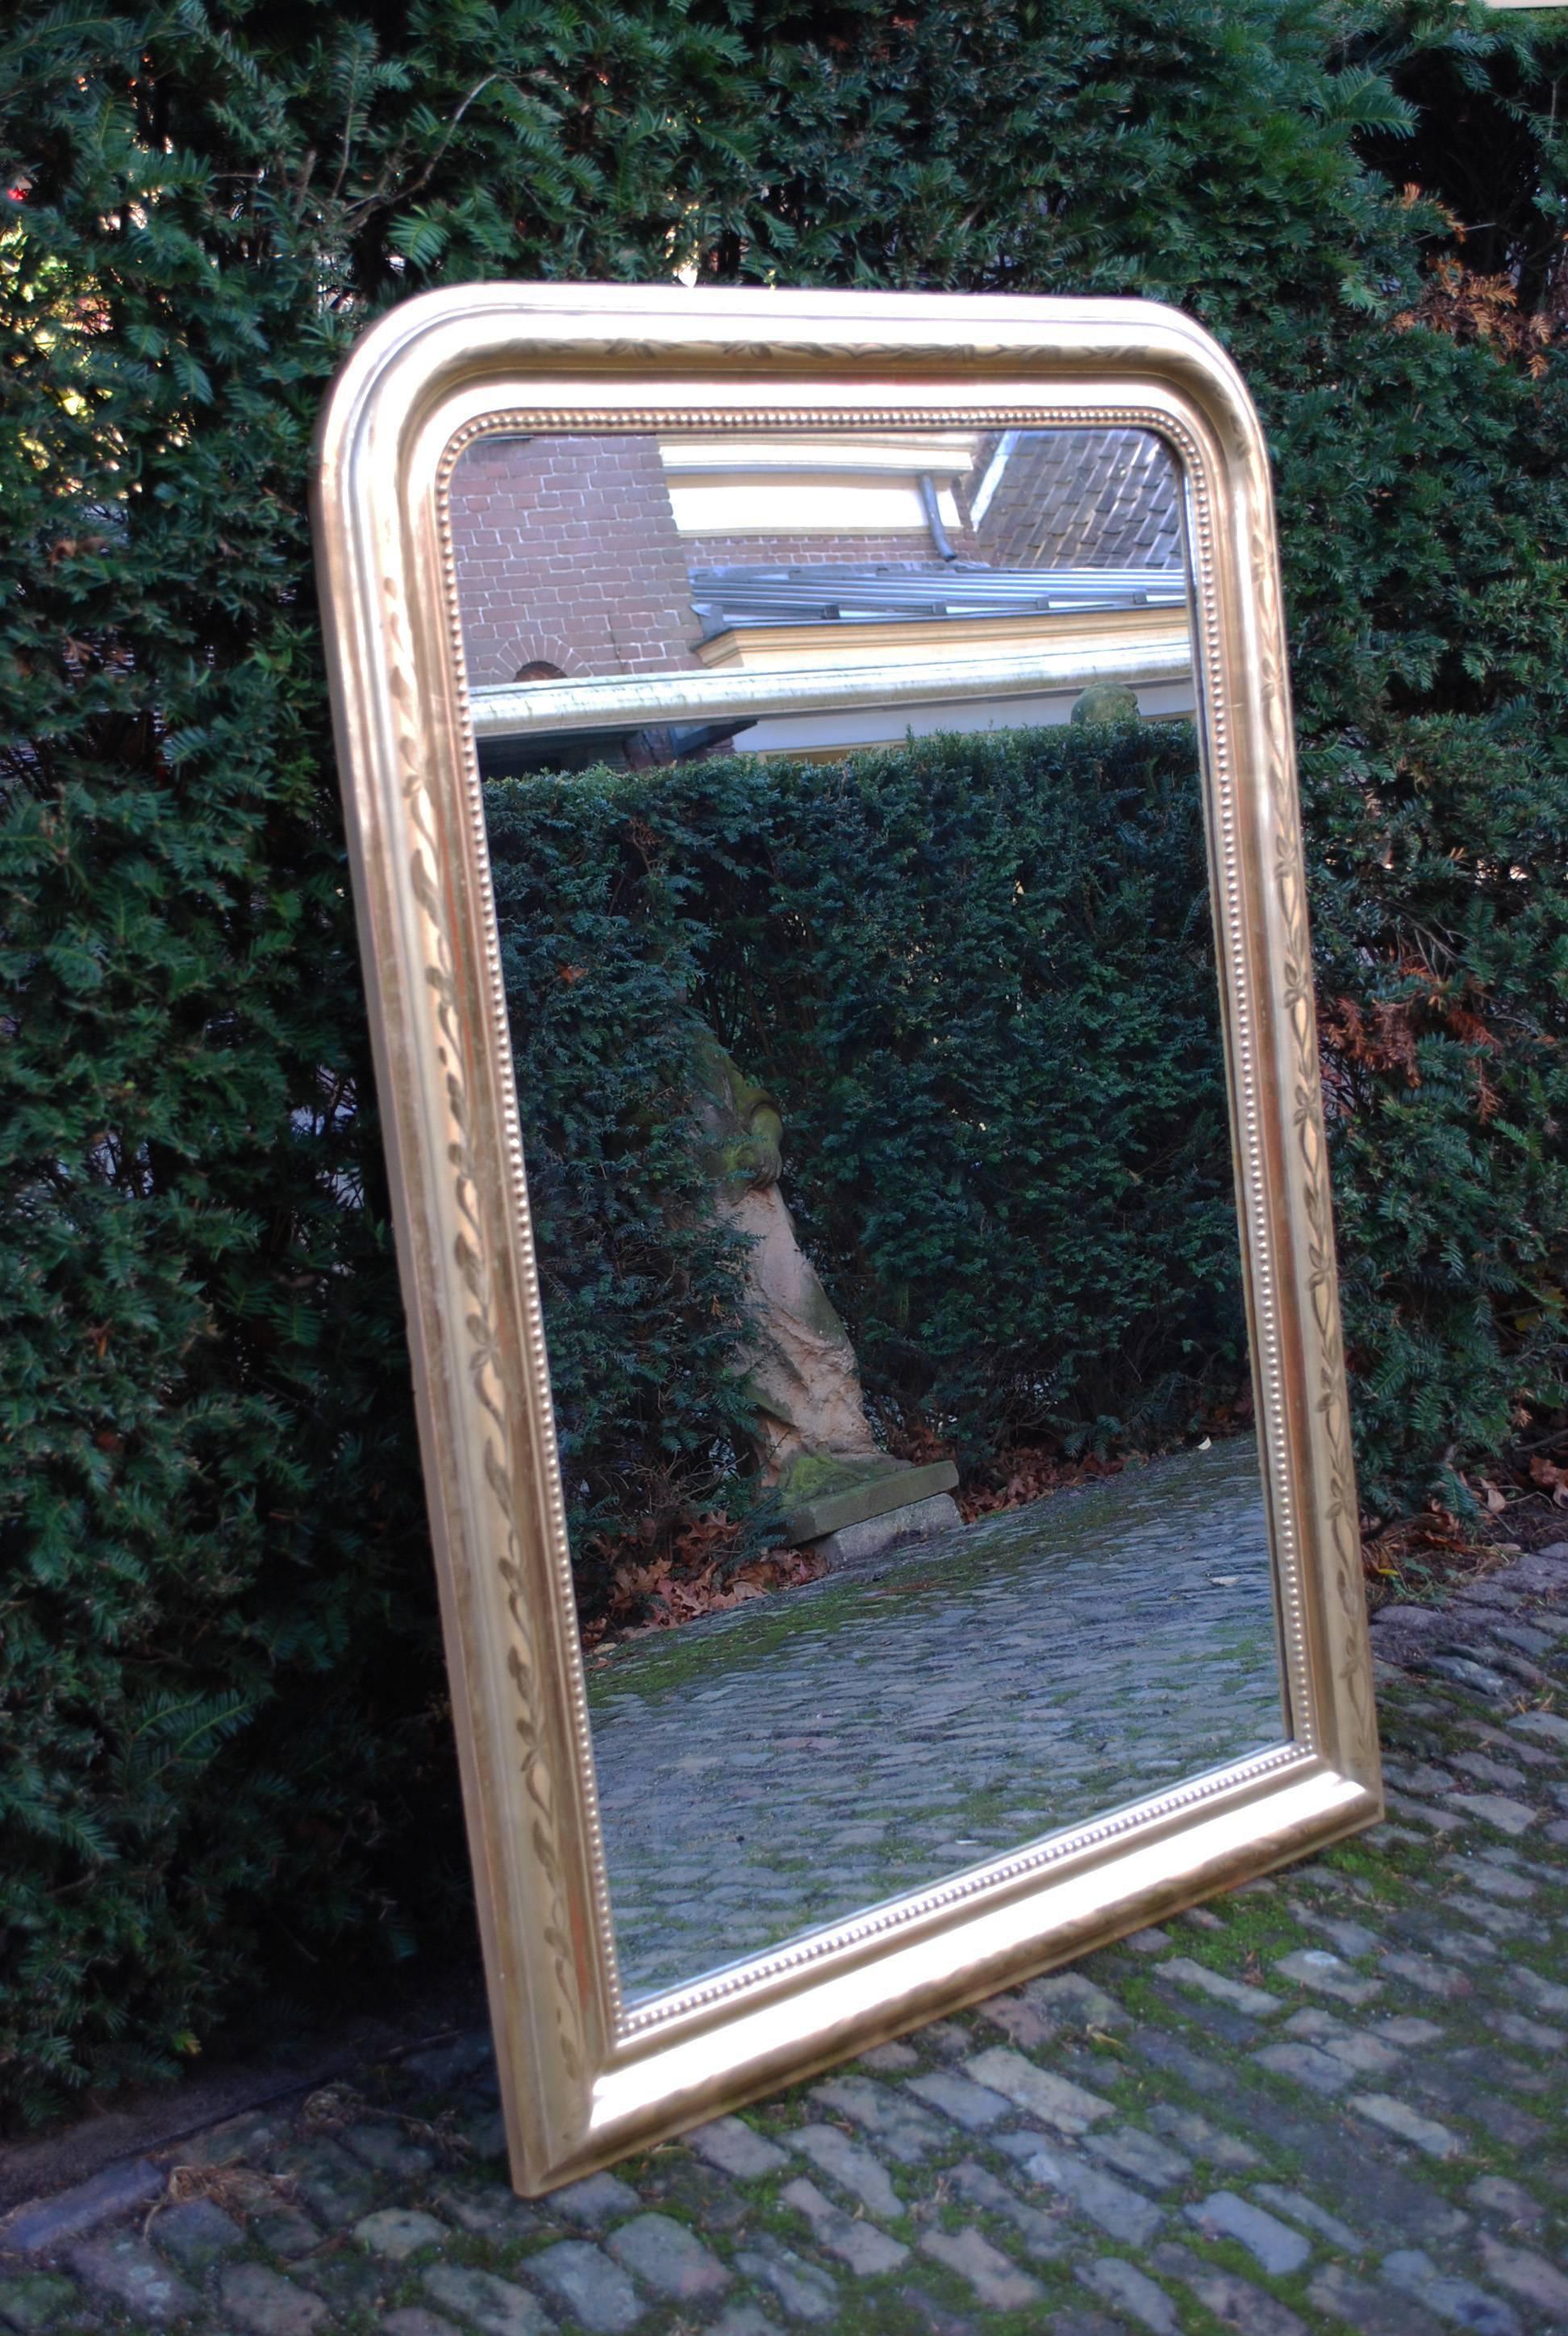 19th century gold gilded mirror with floral encarvings.
Originates France, dating circa 1880.
(Shipping costs on request, depends on destination).